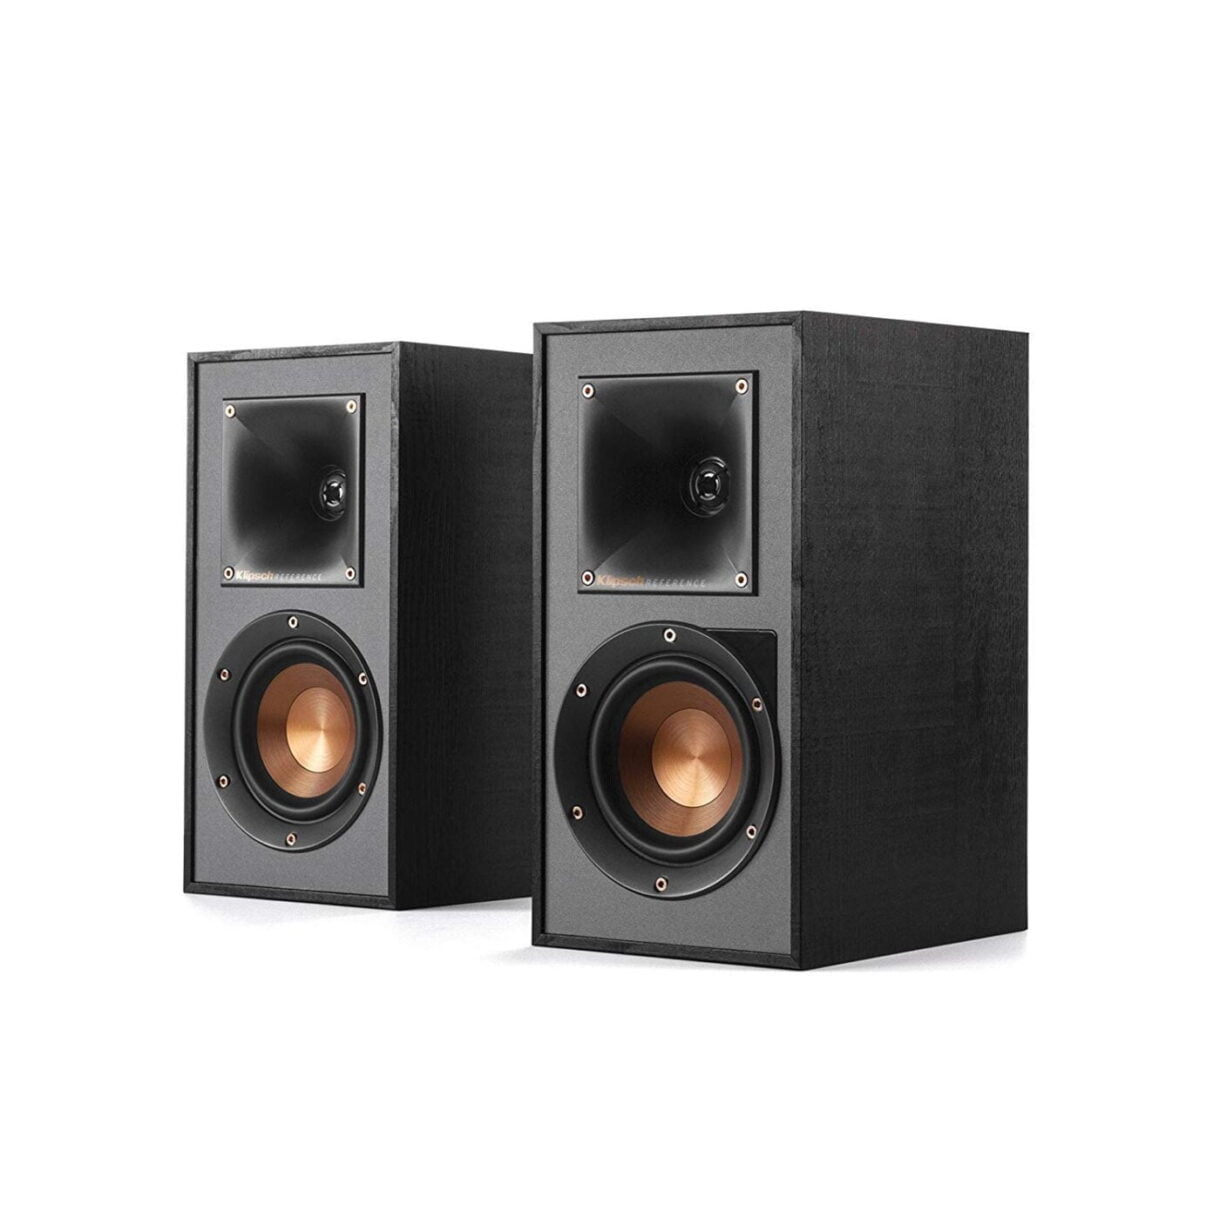 Klipsch R-41PM Powered Speakers with Bluetooth, USB, Phono-preamp